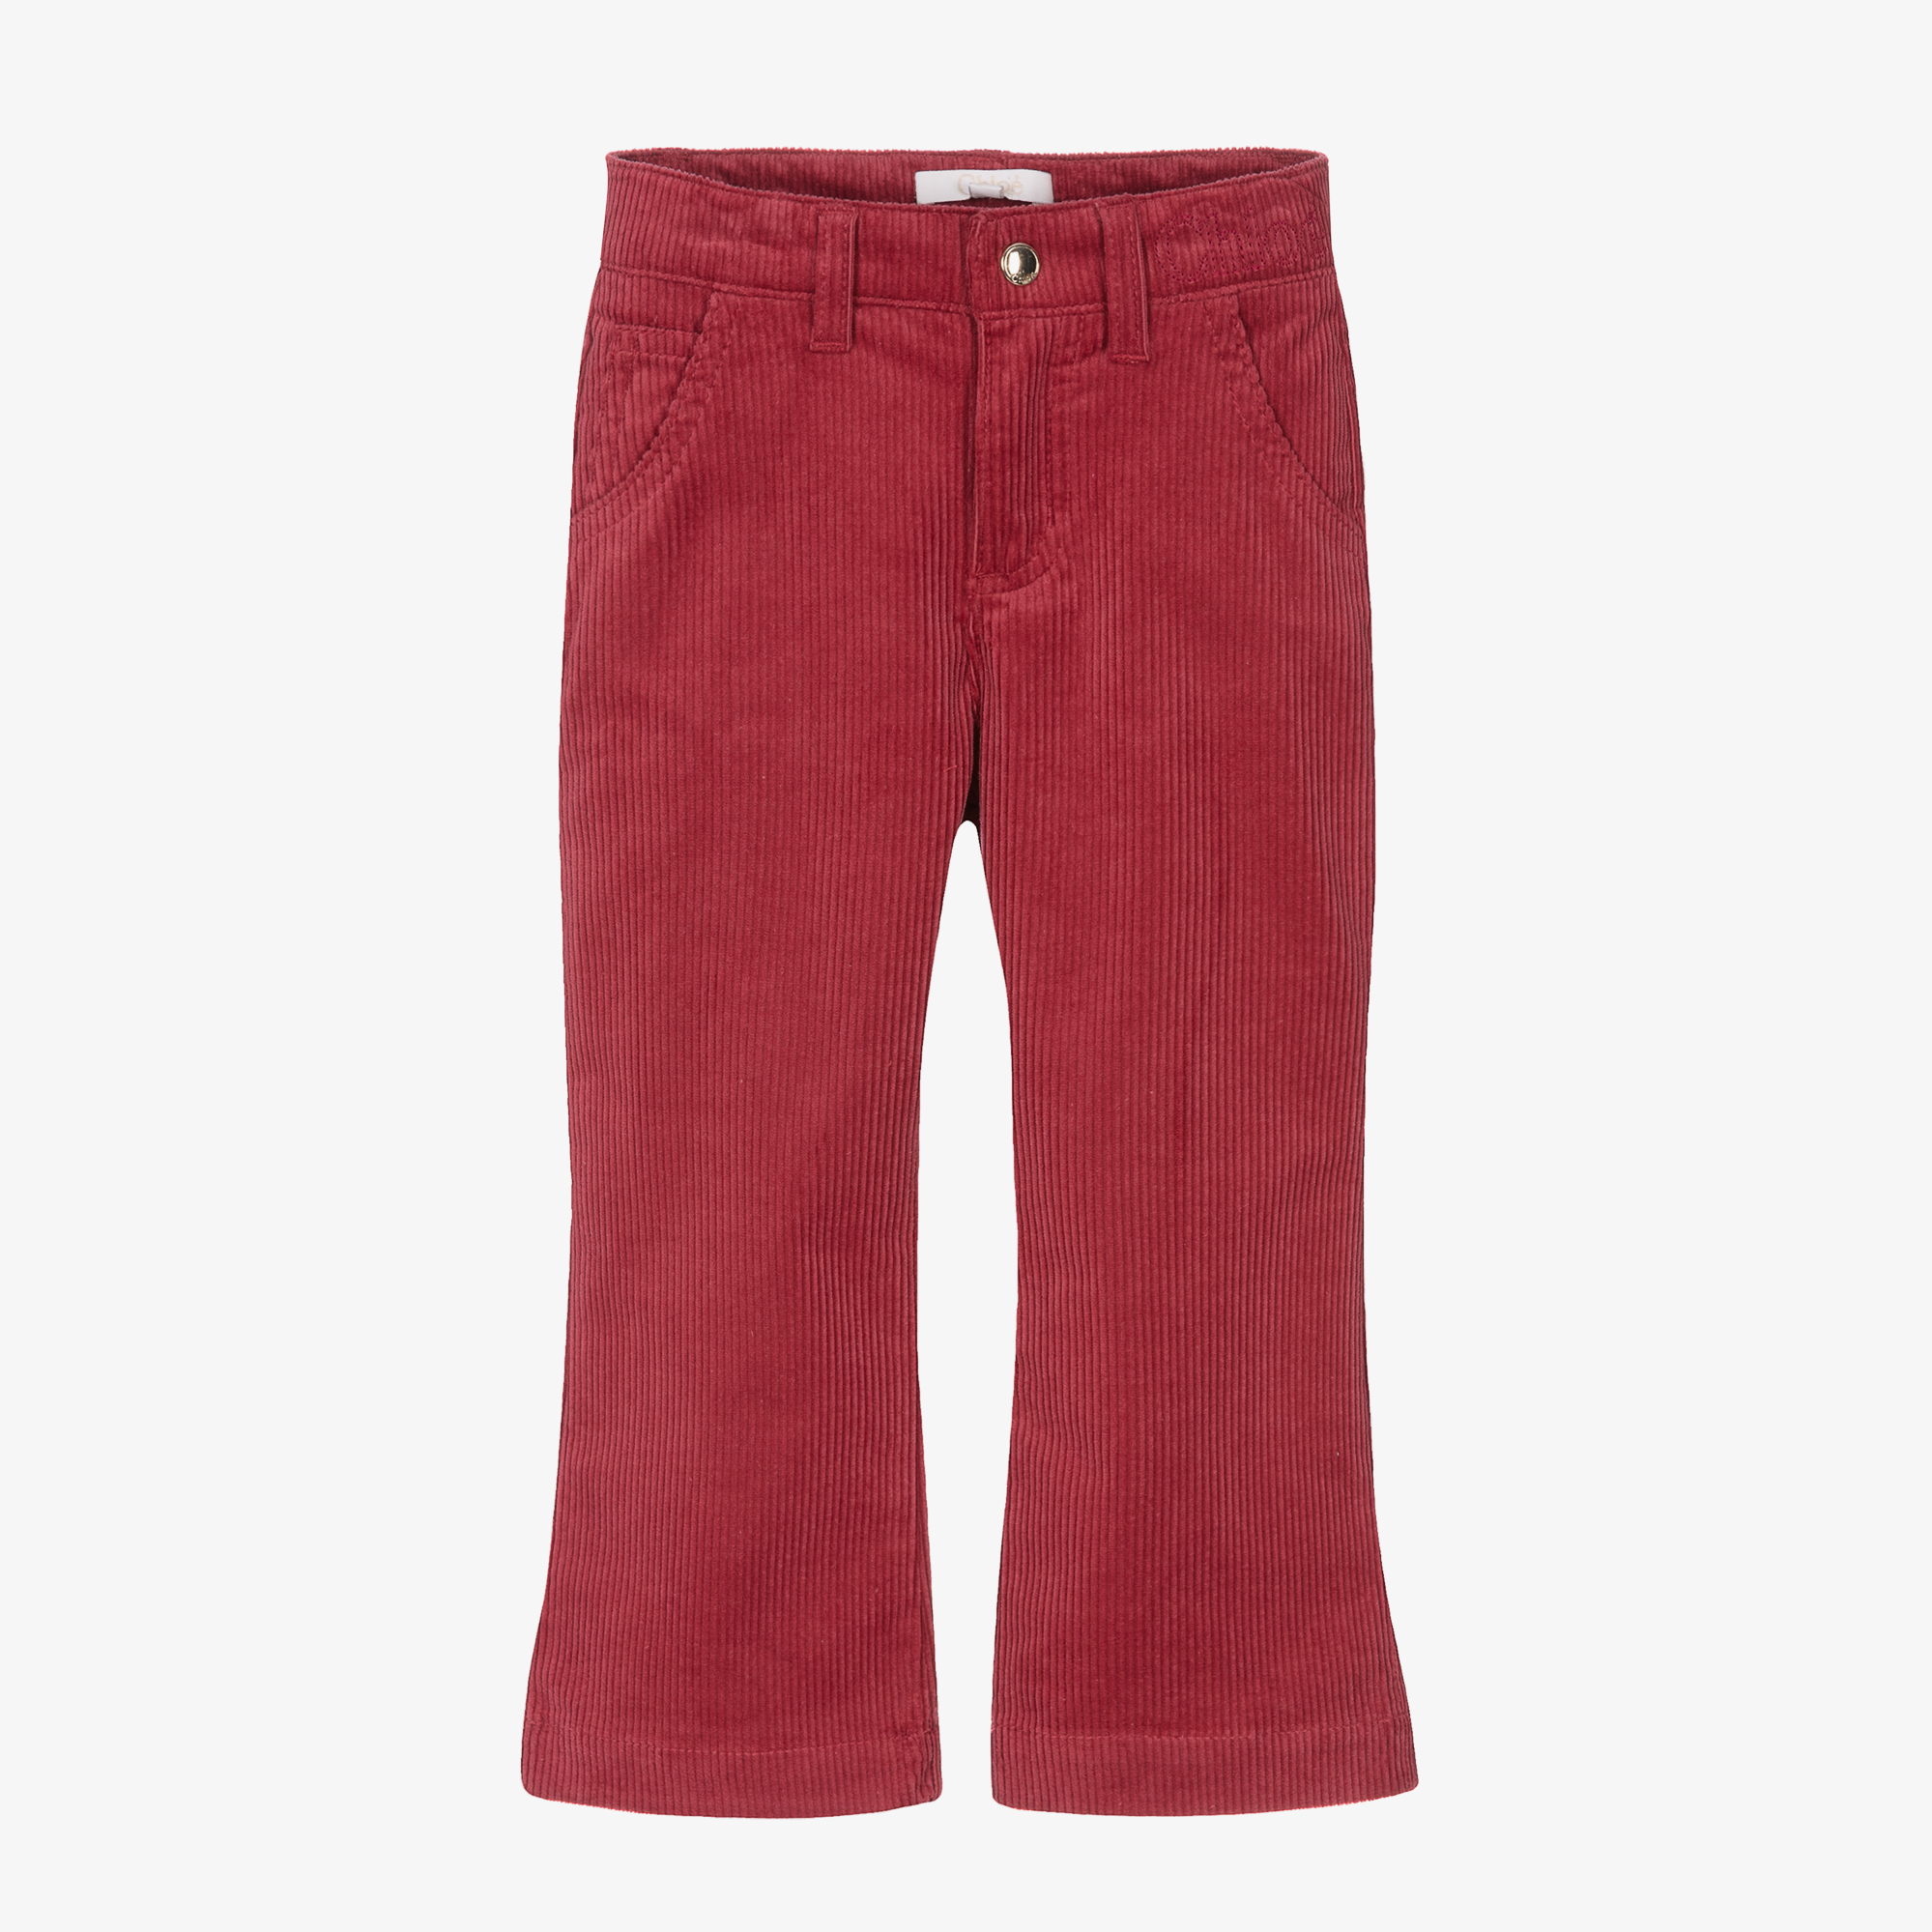 David Lawrence Cleo Wide Leg Corduroy Pant In Cranberry | MYER